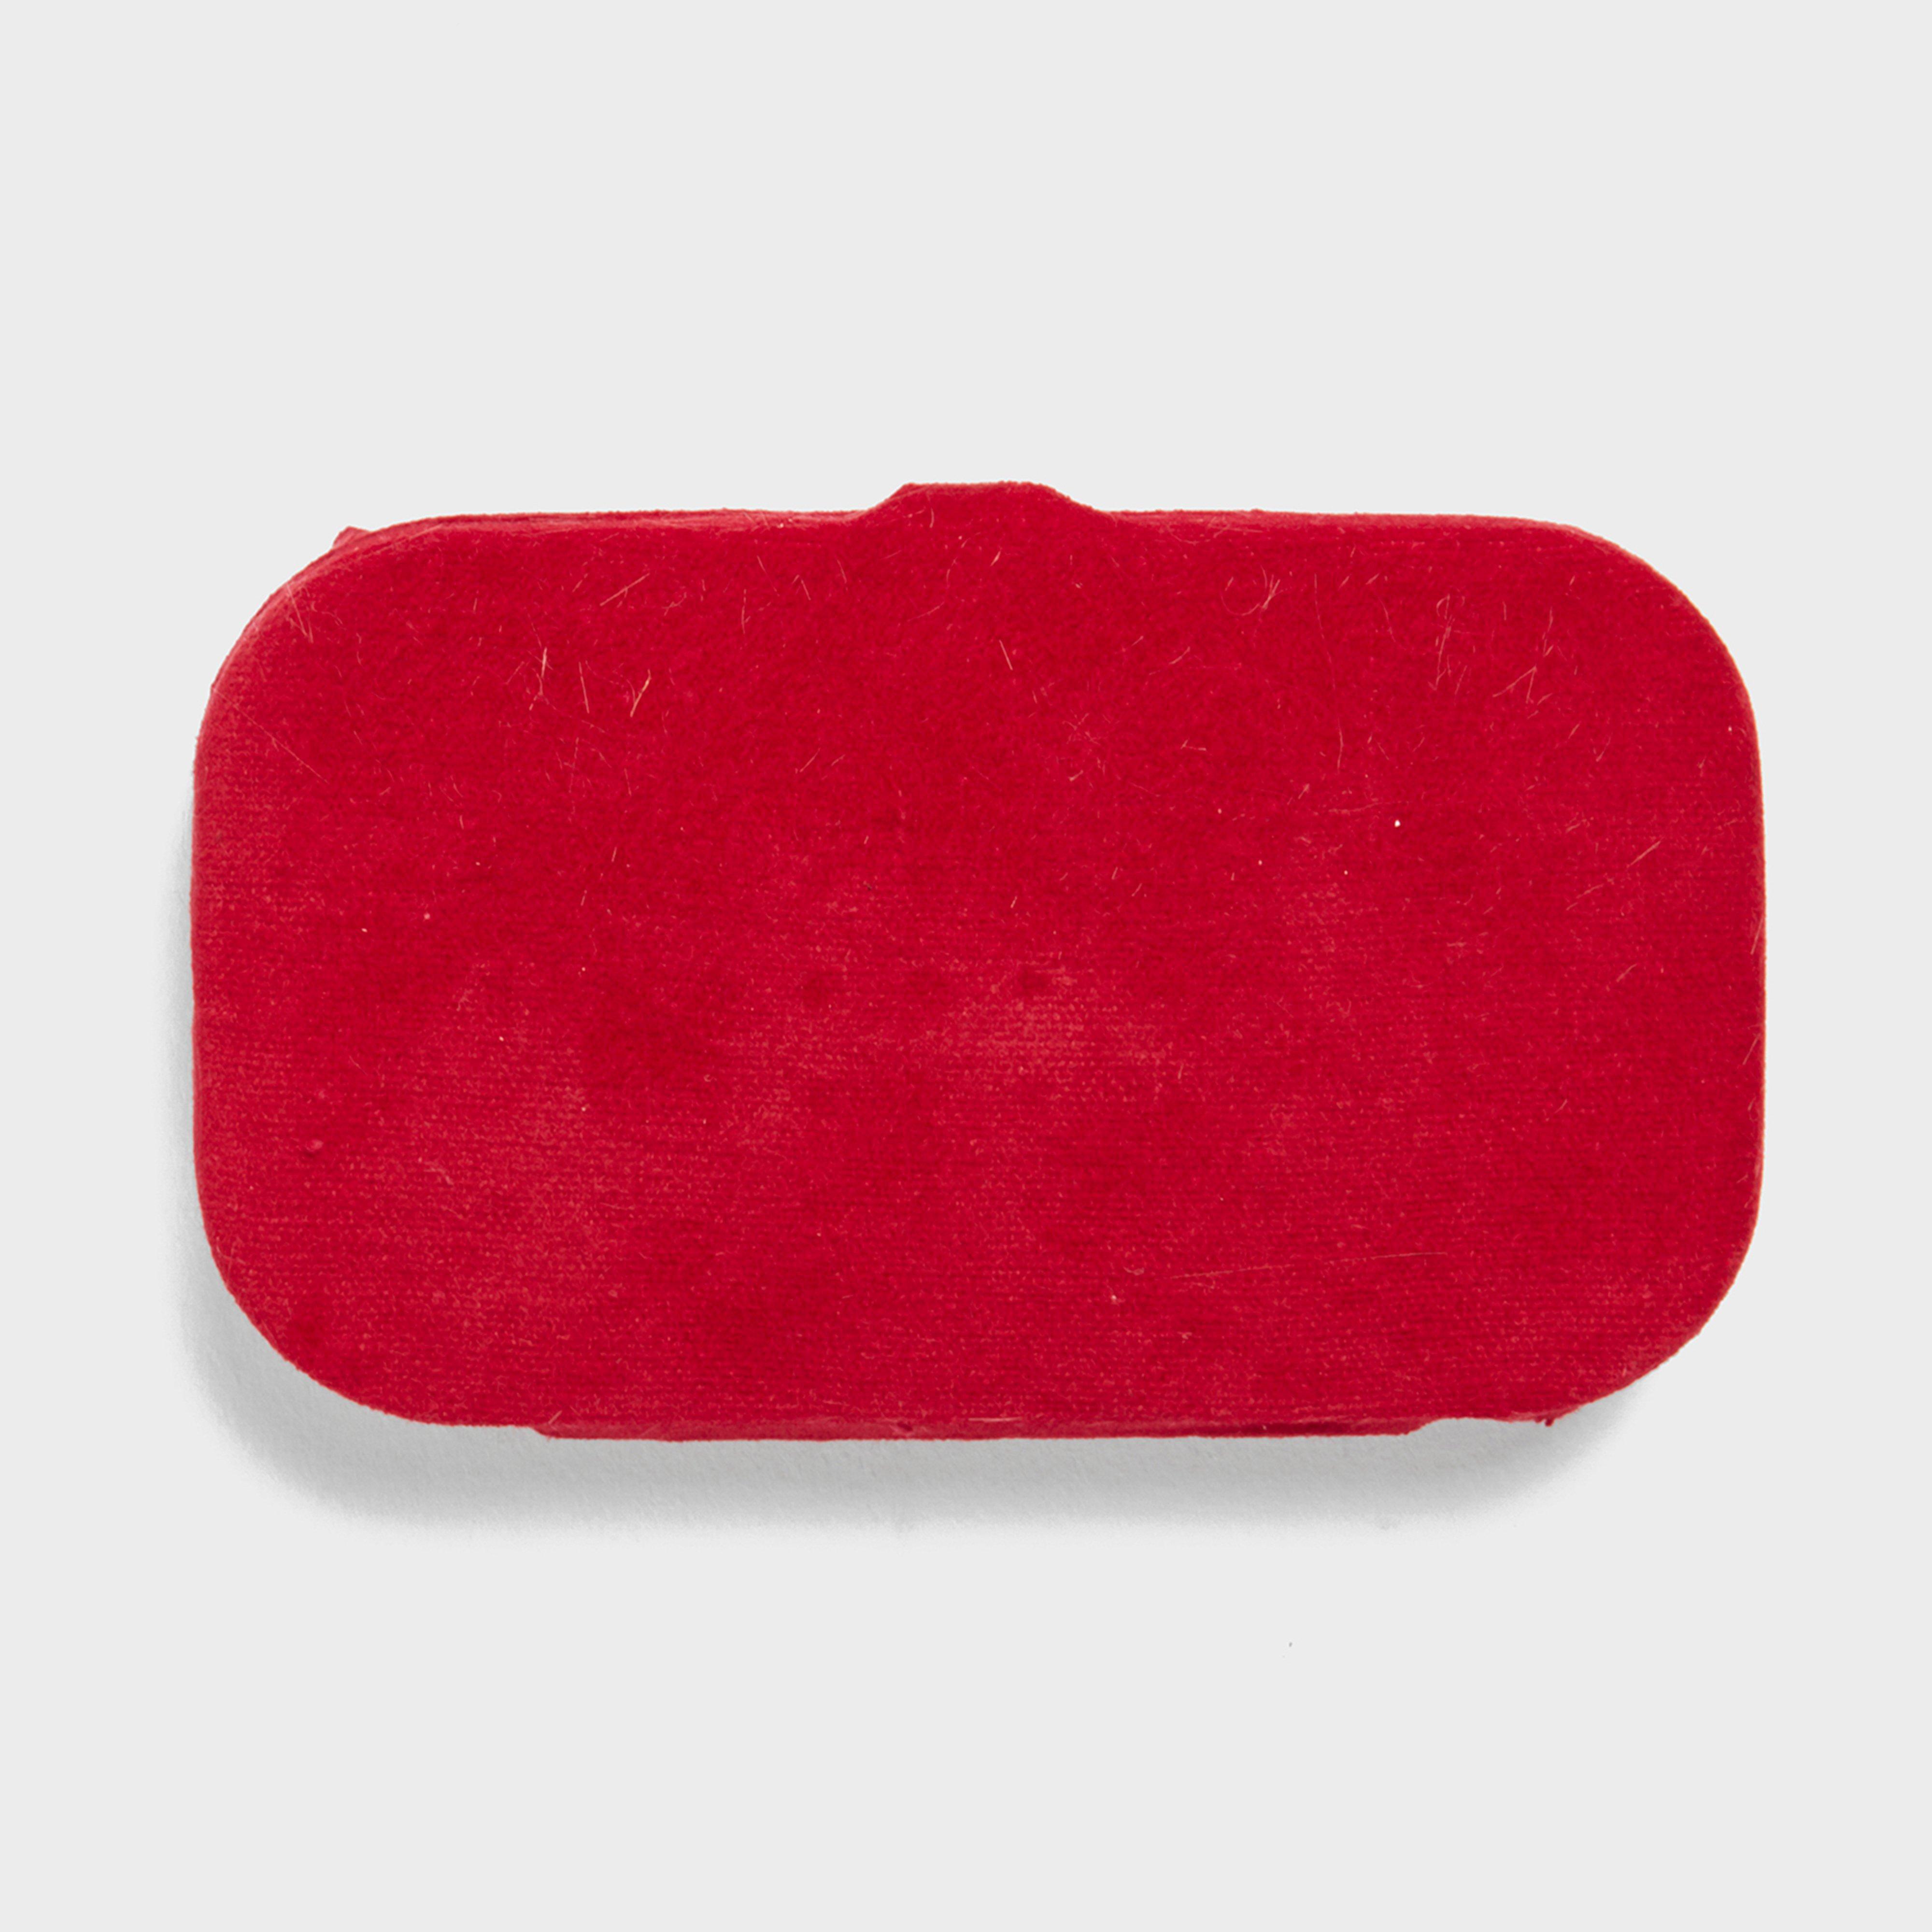 Eurohike Handwarmer - Red/red  Red/red